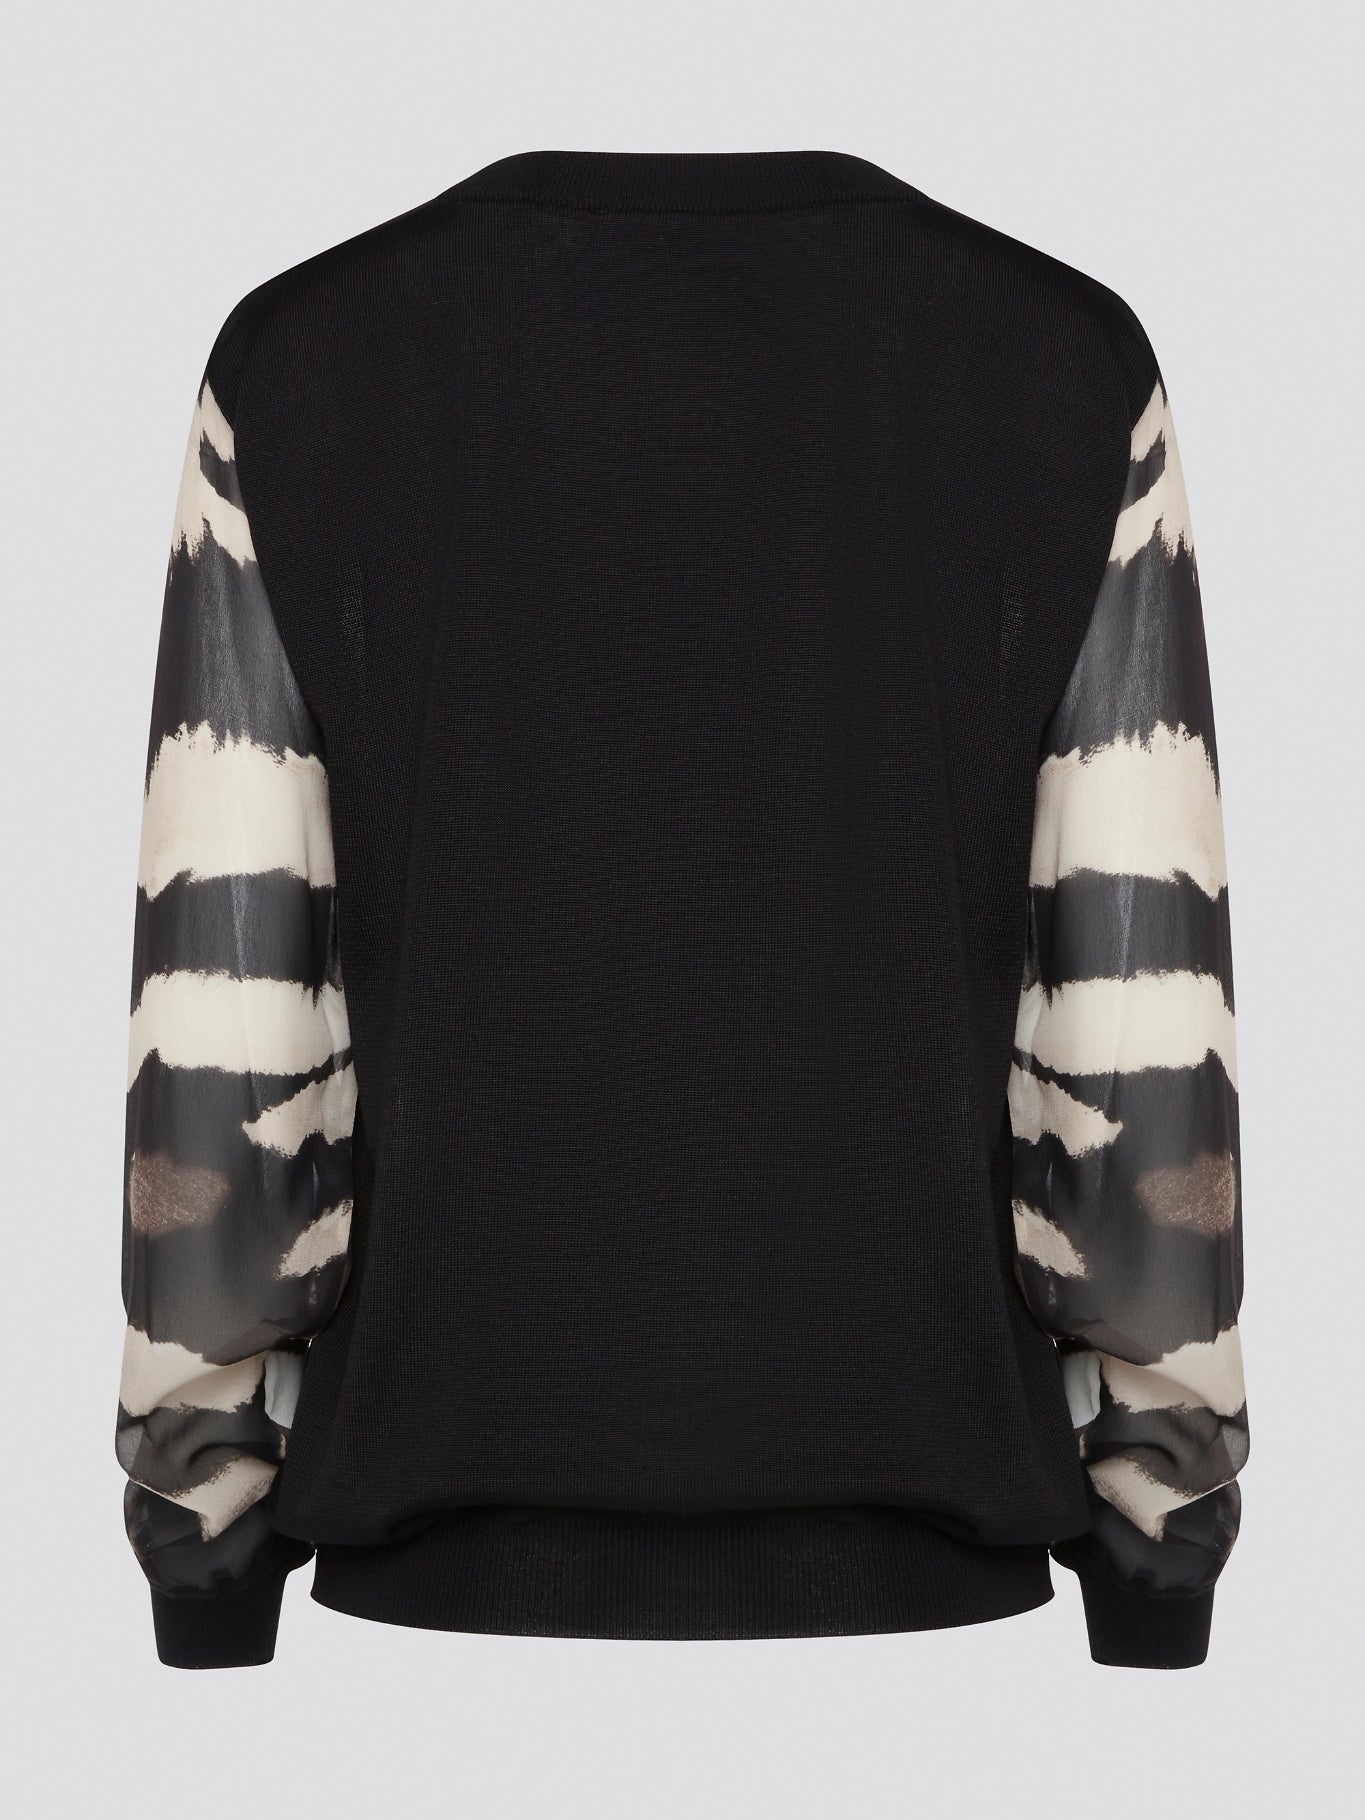 Make a fierce fashion statement with the Roberto Cavalli Zebra Print Sweatshirt, featuring a bold and eye-catching zebra print design. Crafted from premium materials, this sweatshirt offers both style and comfort for all-day wear. Elevate your street style with this standout piece that is sure to turn heads wherever you go.